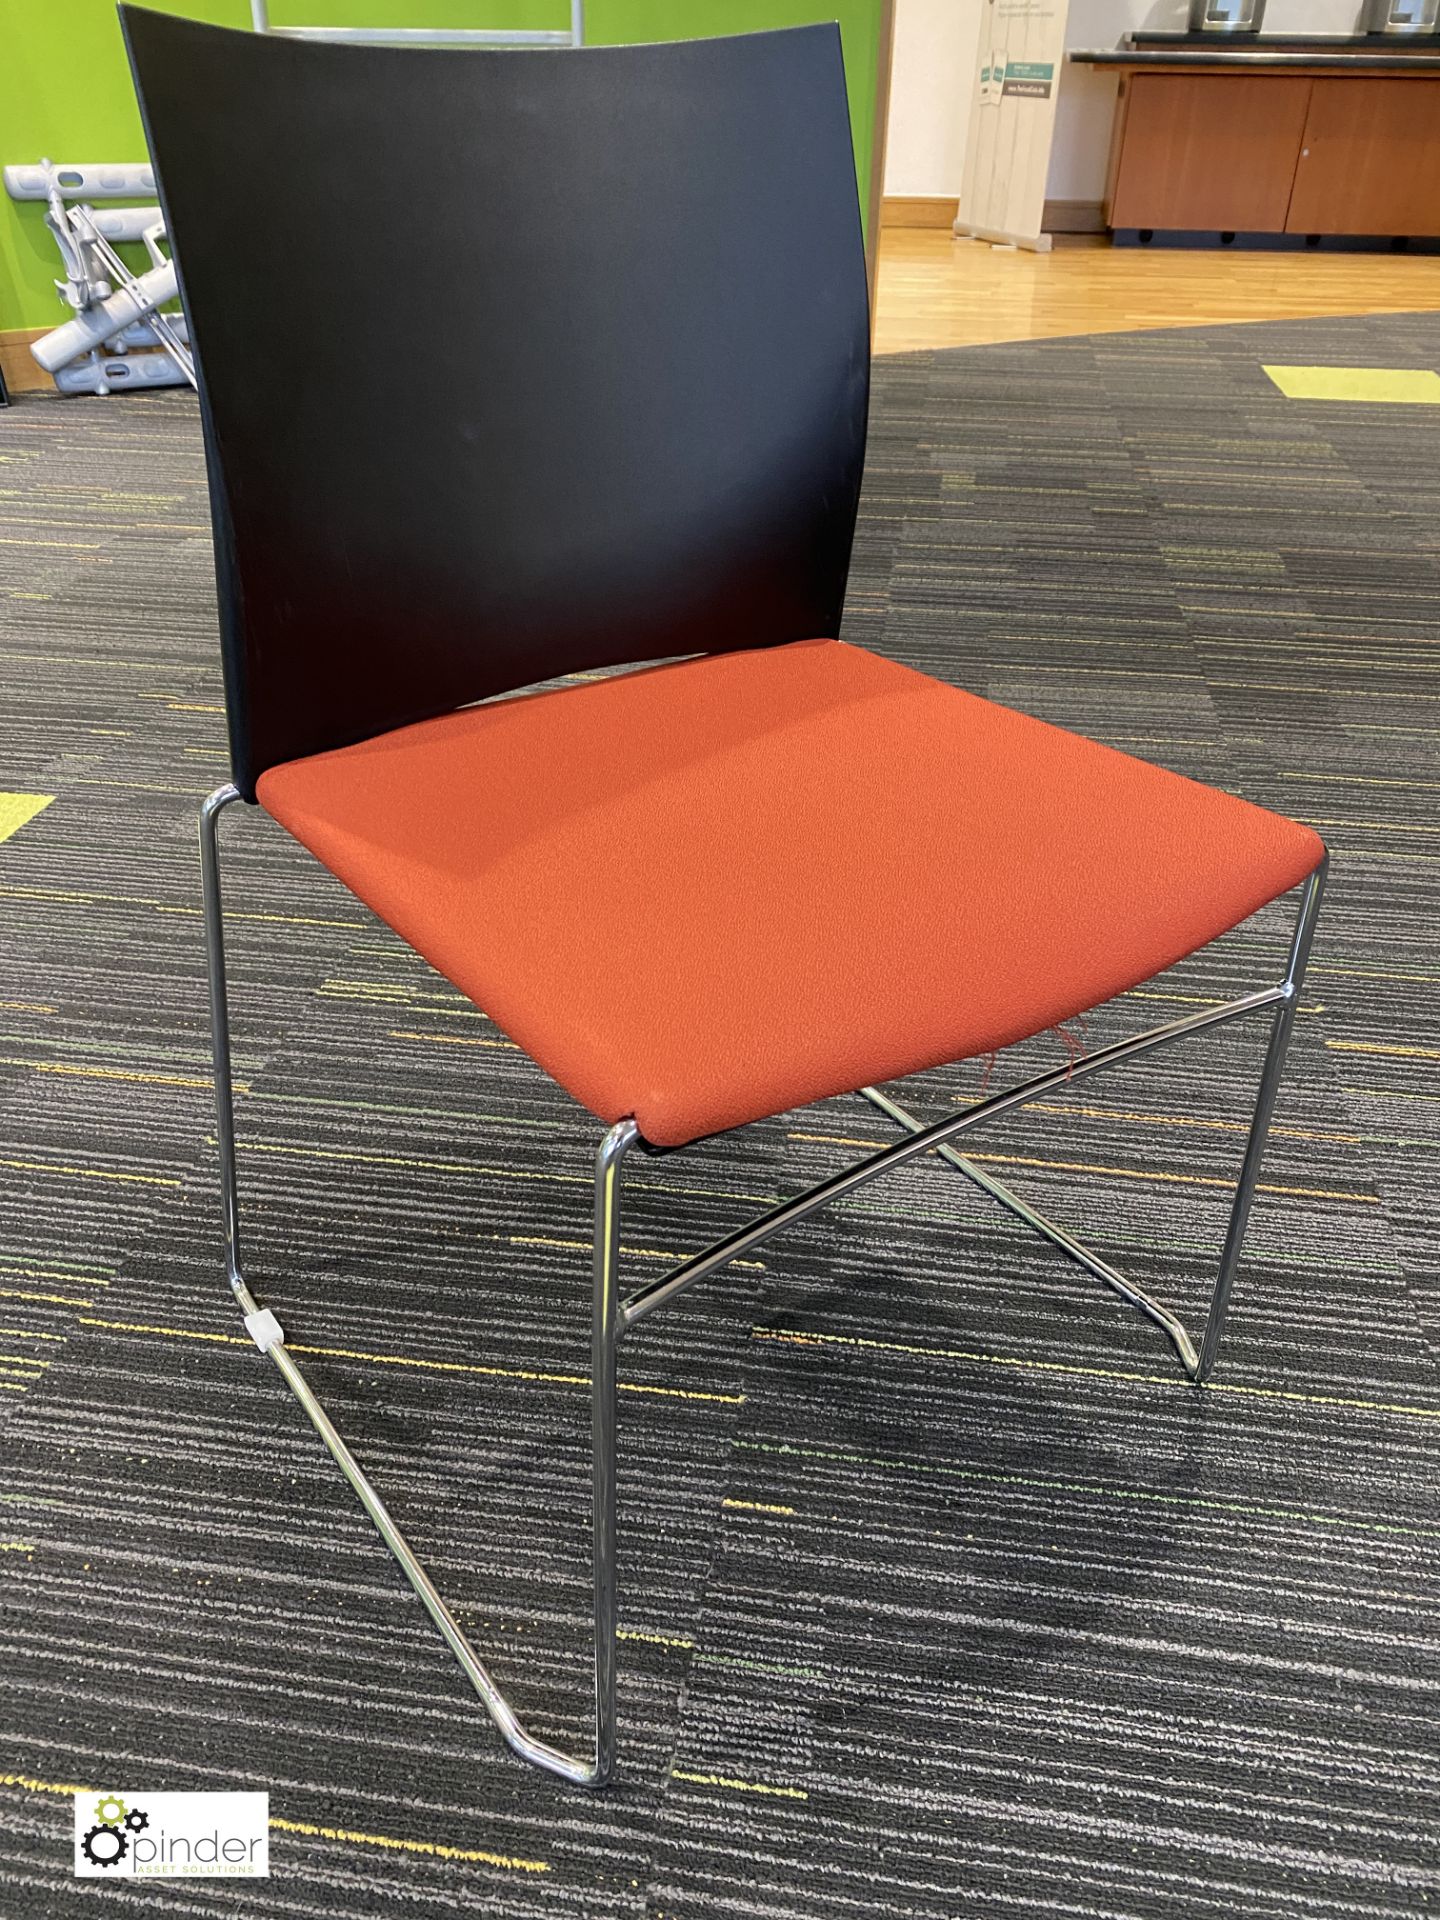 4 Connection MXP1A/AFAE/1 Jamaica chrome tubular framed stackable Meeting Chairs, with upholstered